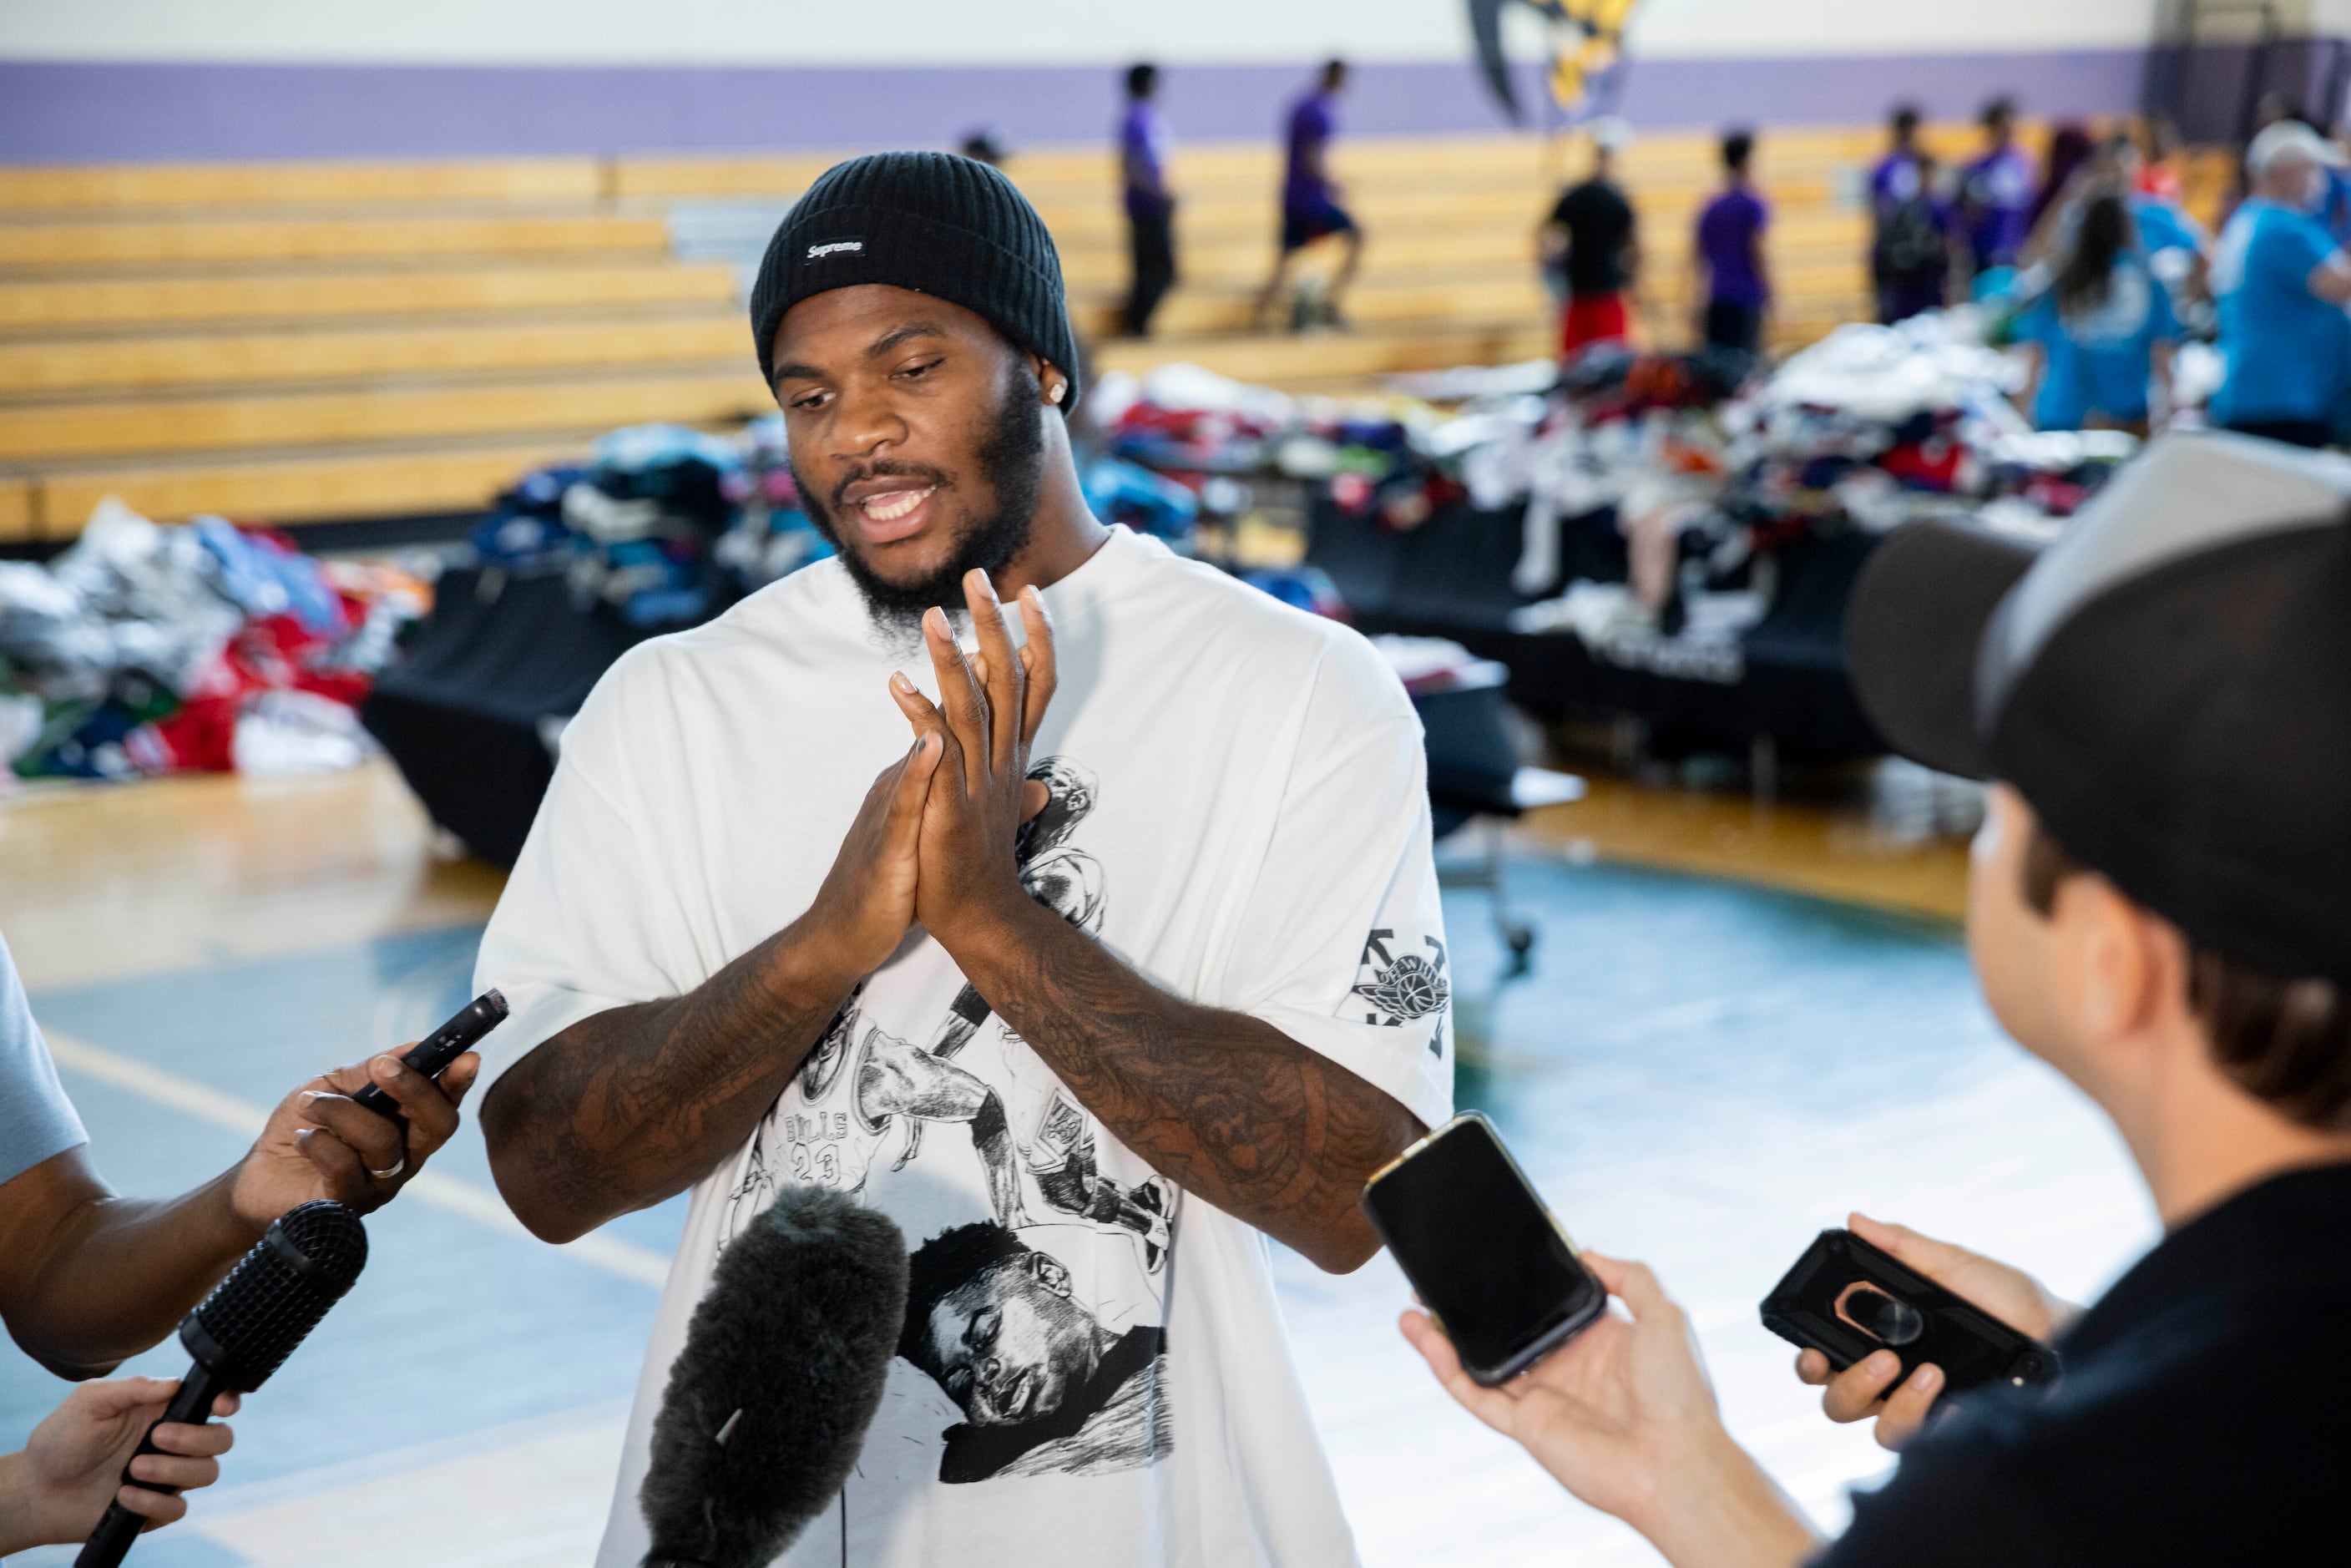 Giving back: See photos of Cowboys' Micah Parsons playing basketball,  giving away gear to fans at the Grand Prairie Boys & Girls Club